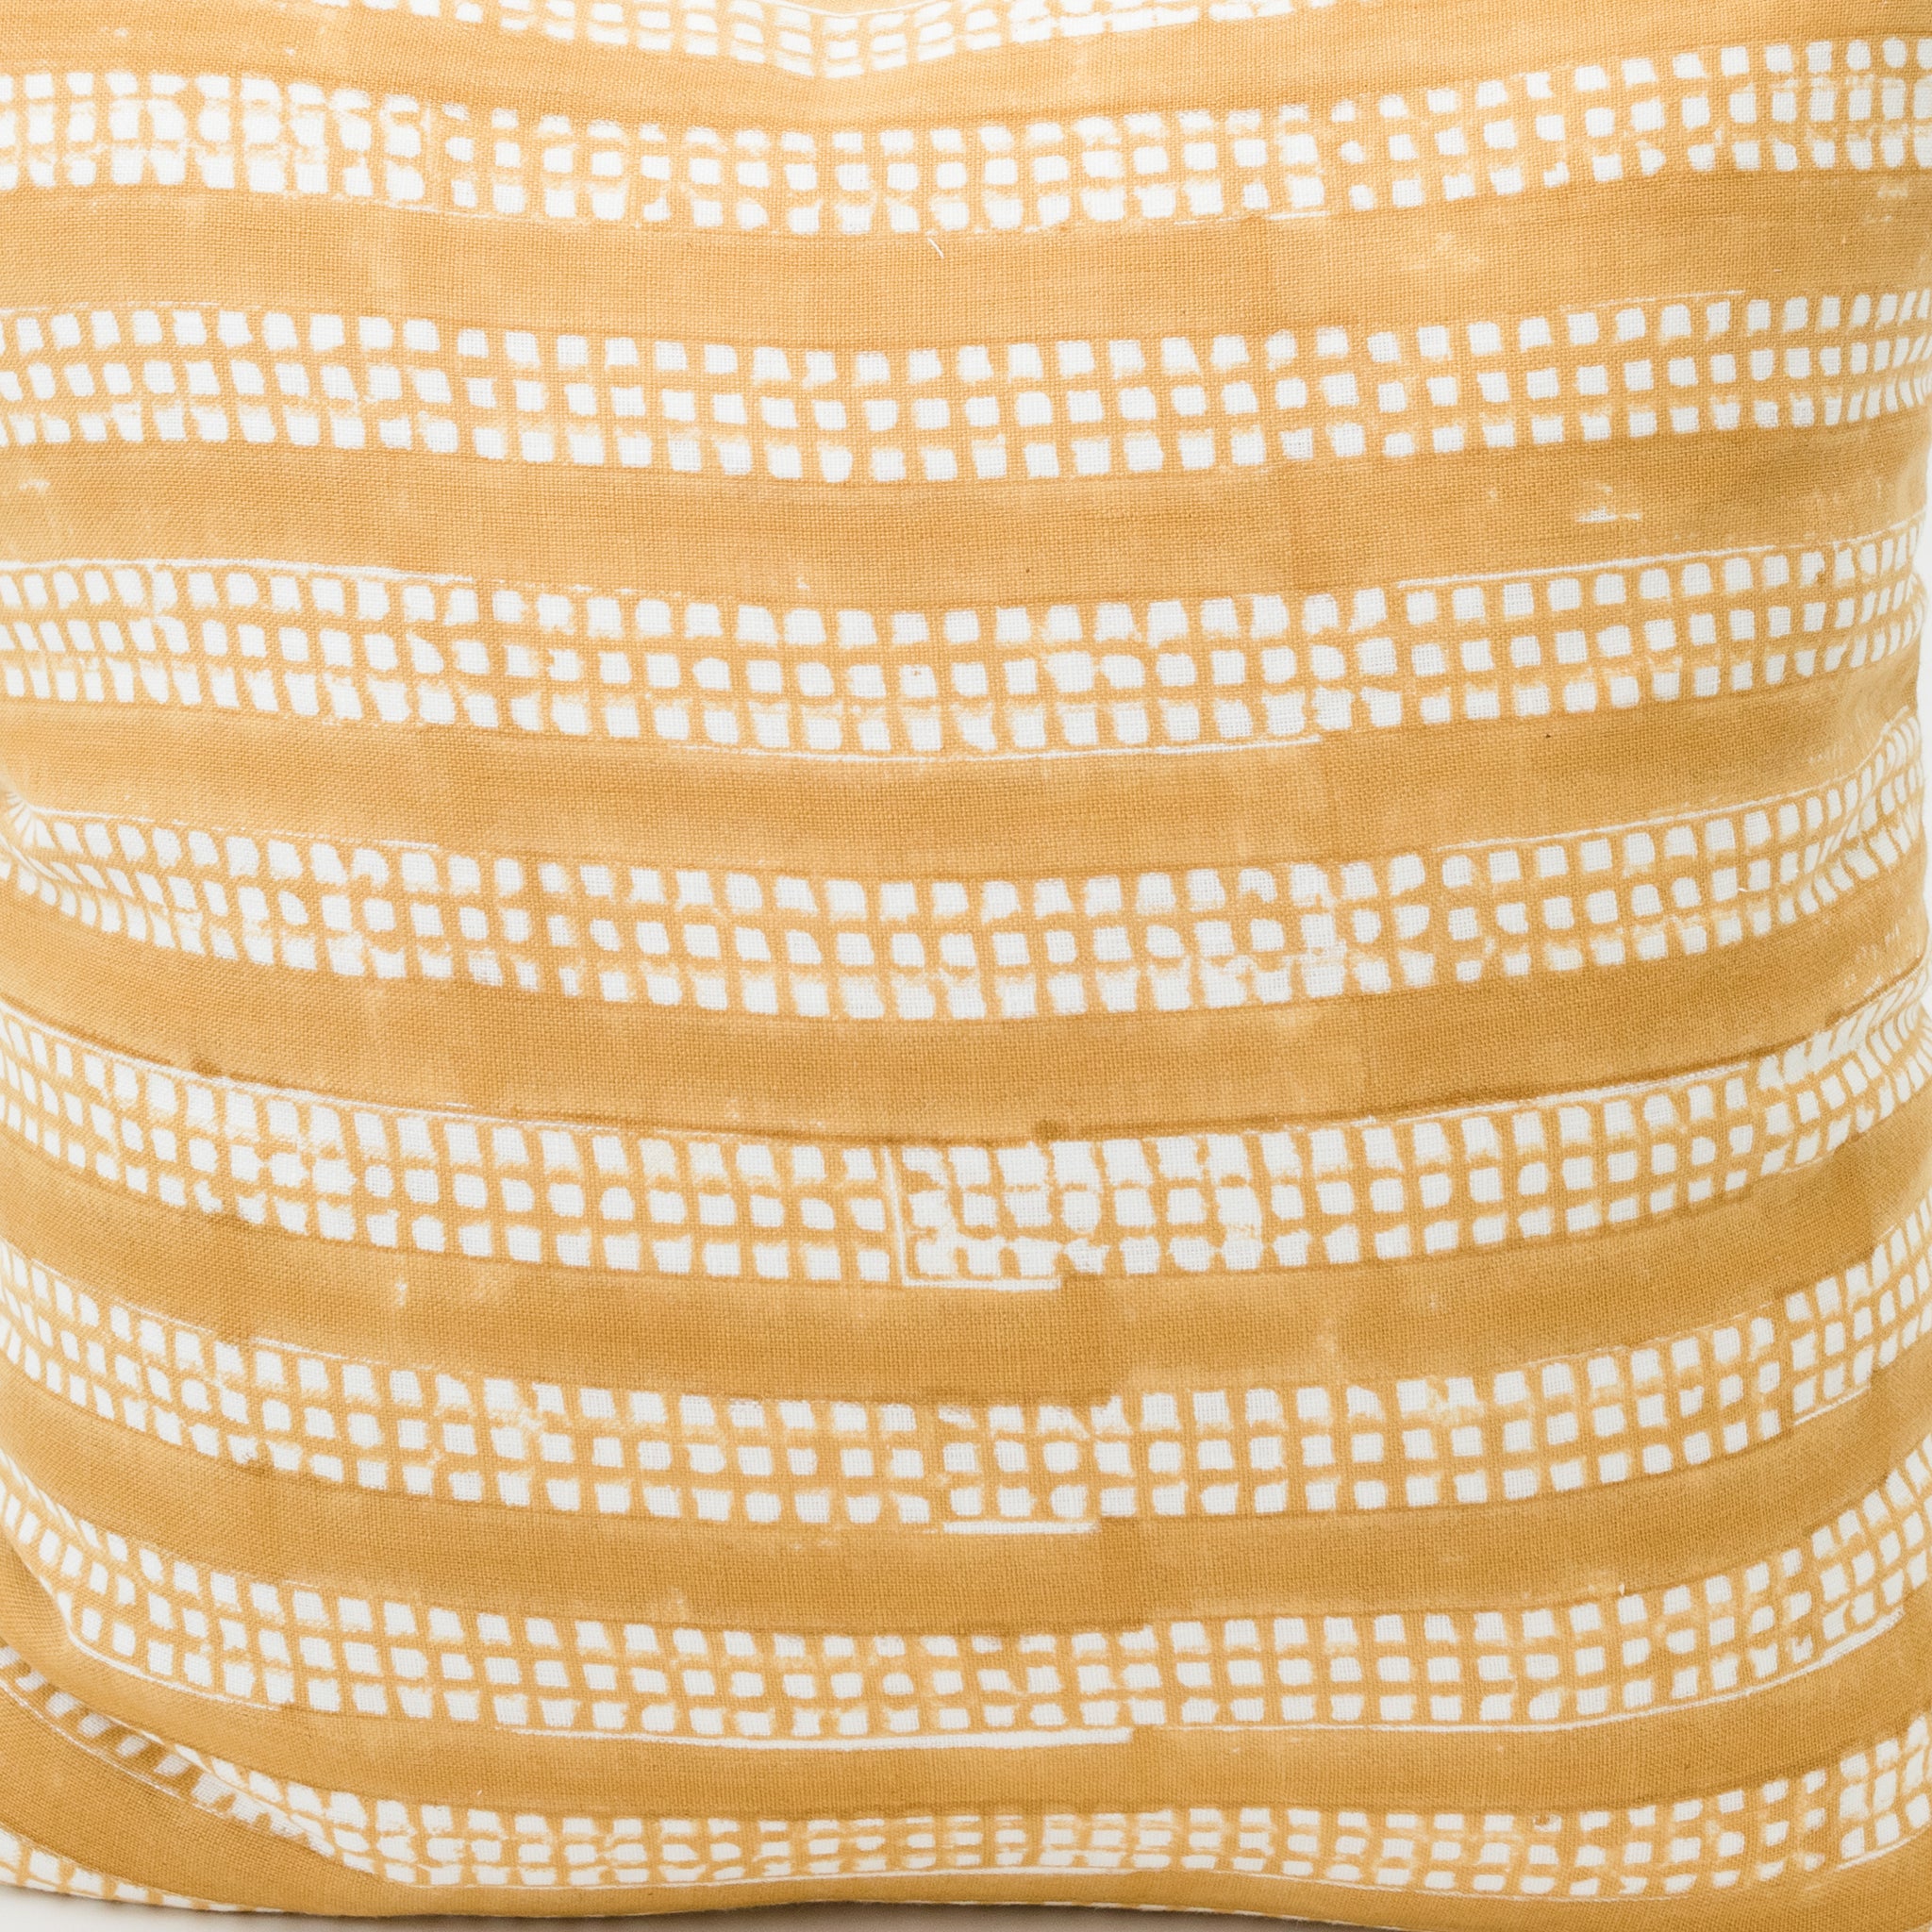 Yellow-Dotted Pillow Cover